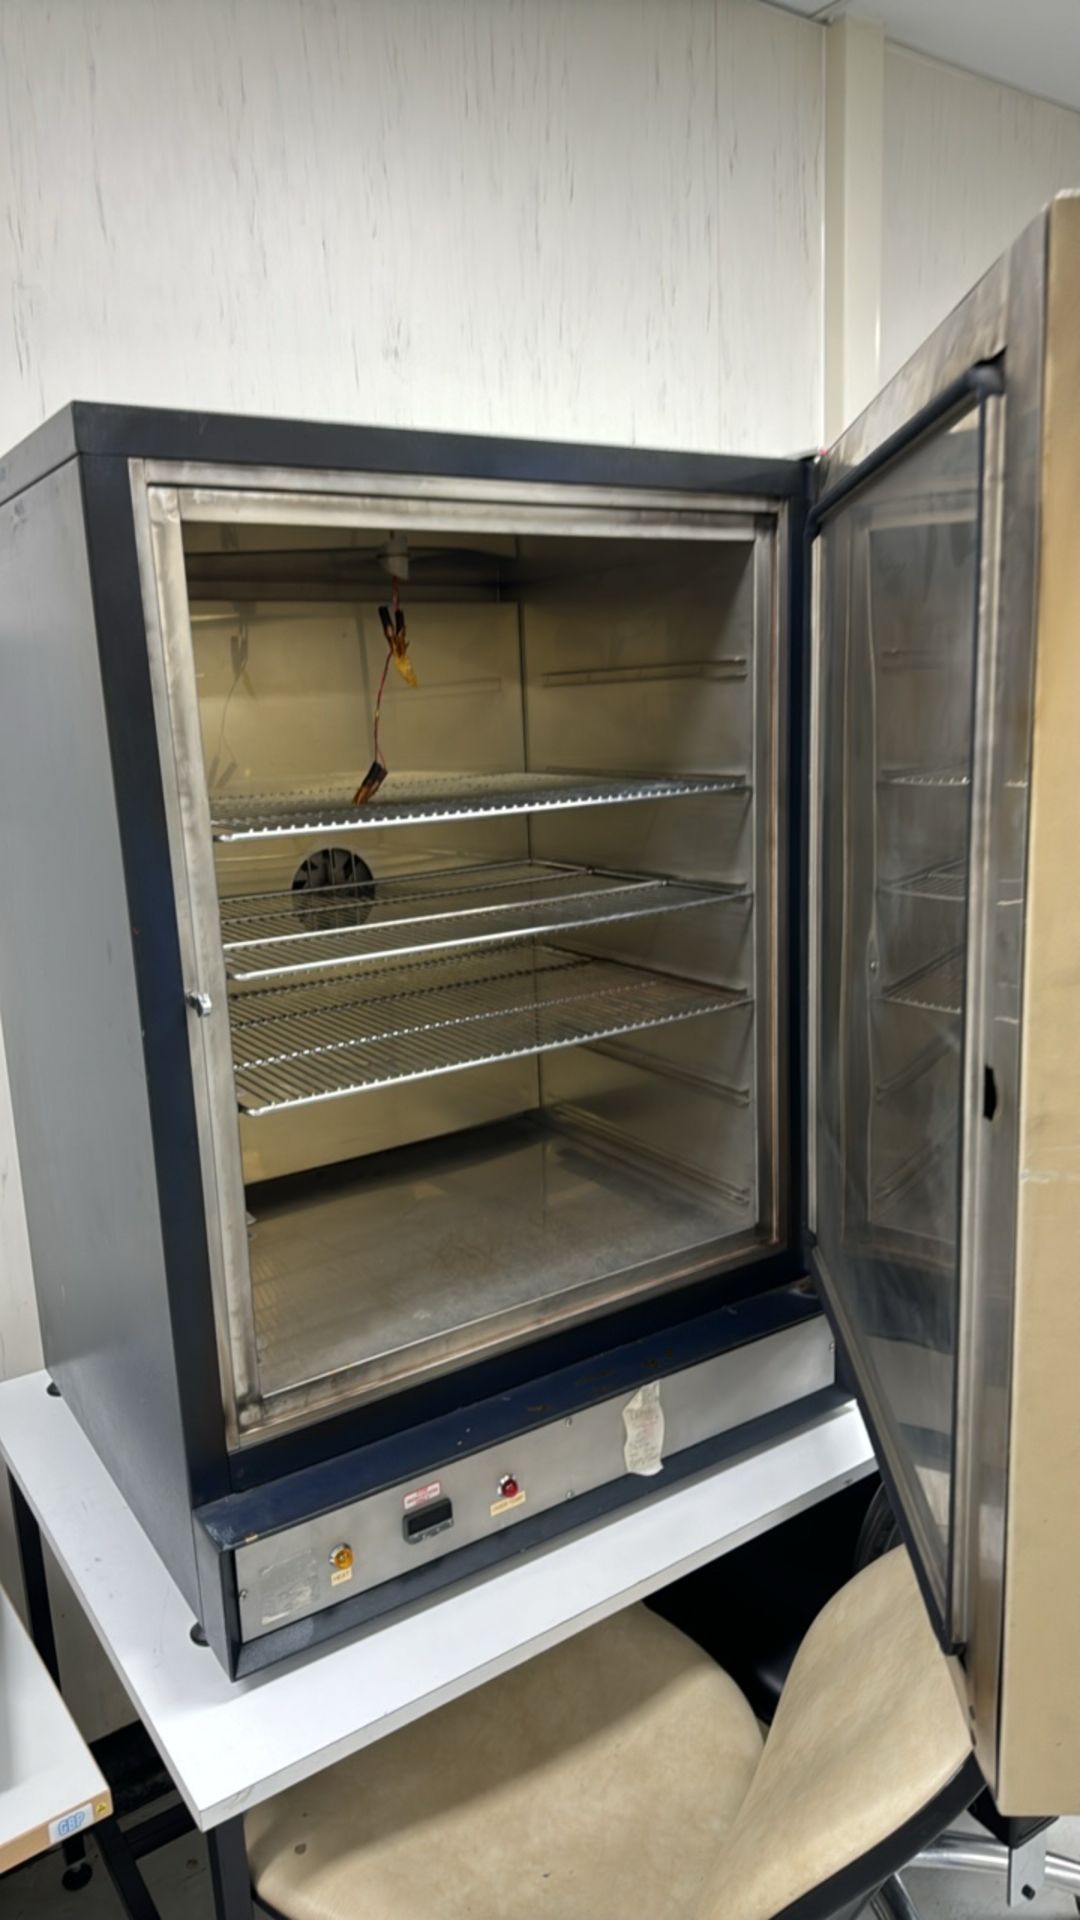 STC Oven - Image 5 of 5